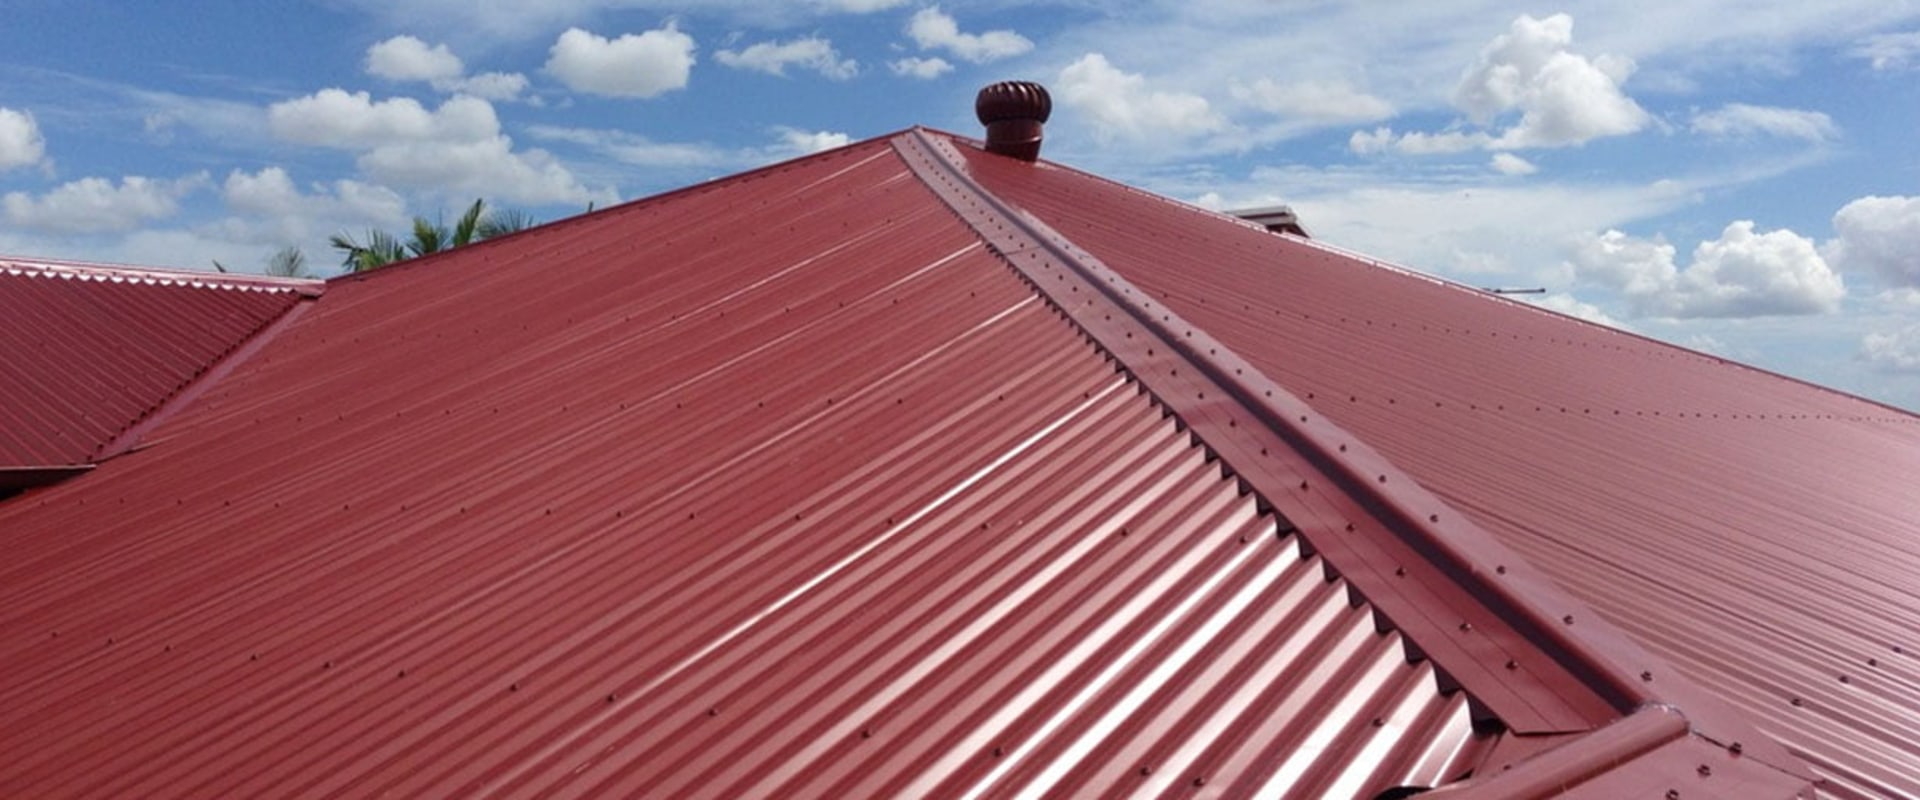 Types of Flat Roofing Materials for Your Next Roofing Project